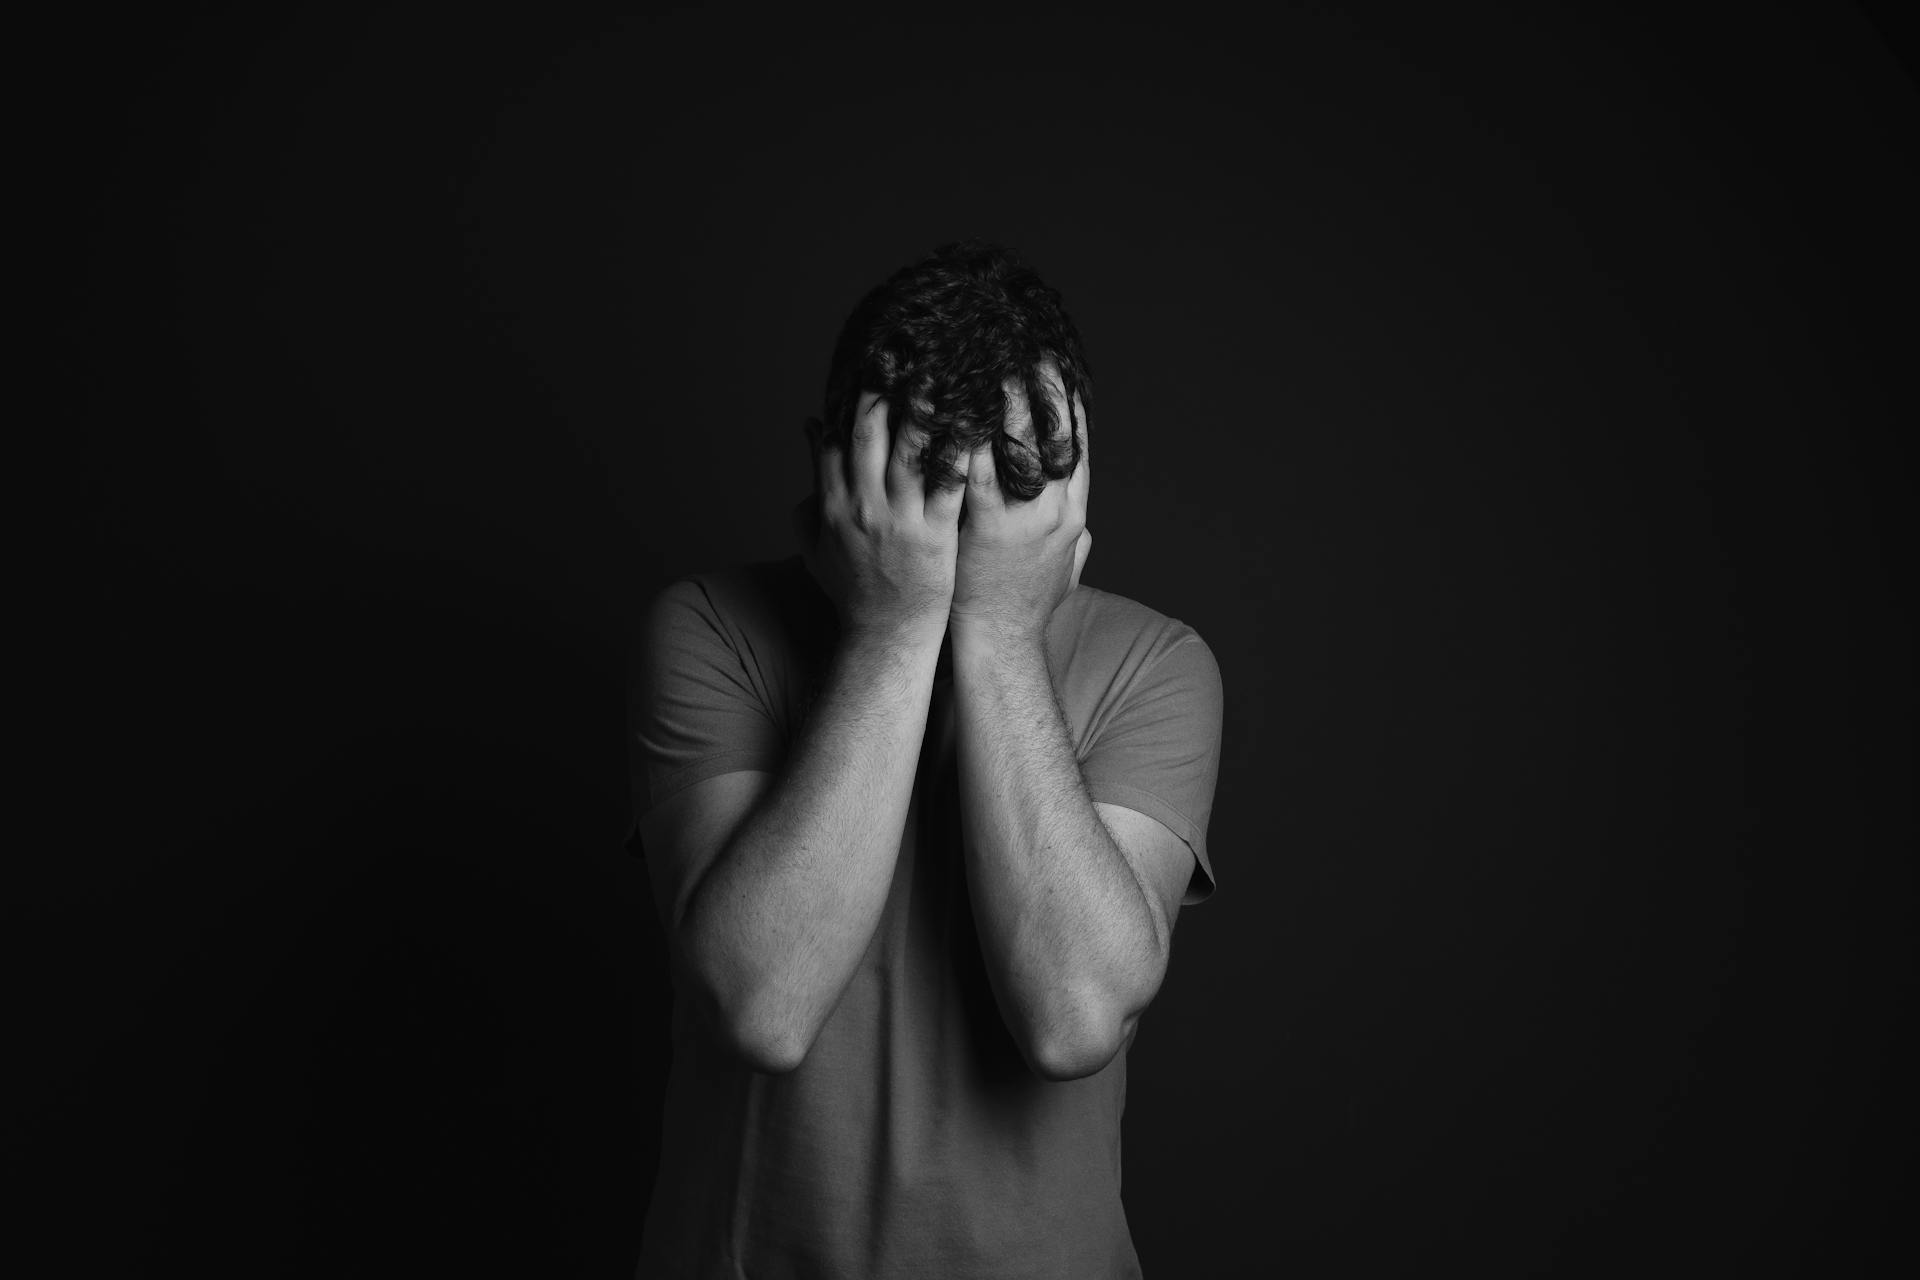 A shocked man covering his face | Source: Pexels